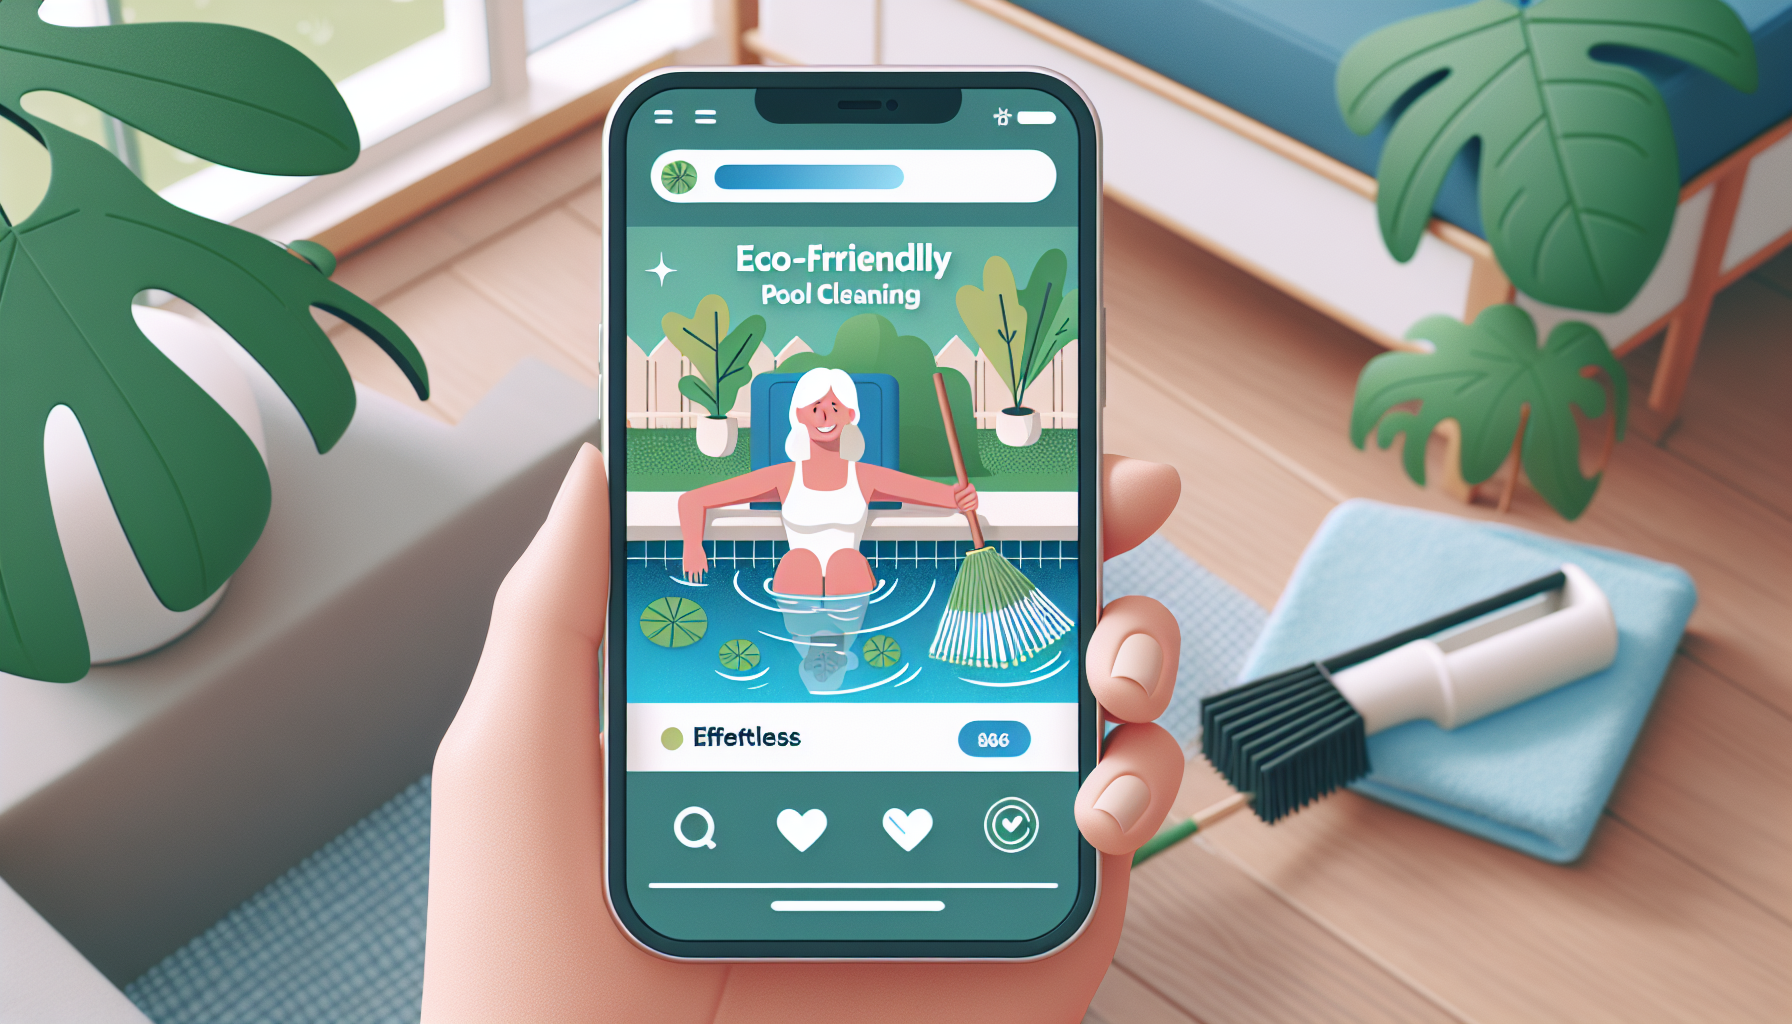 Uncover the eco-friendly TikTok secret for easy pool cleaning